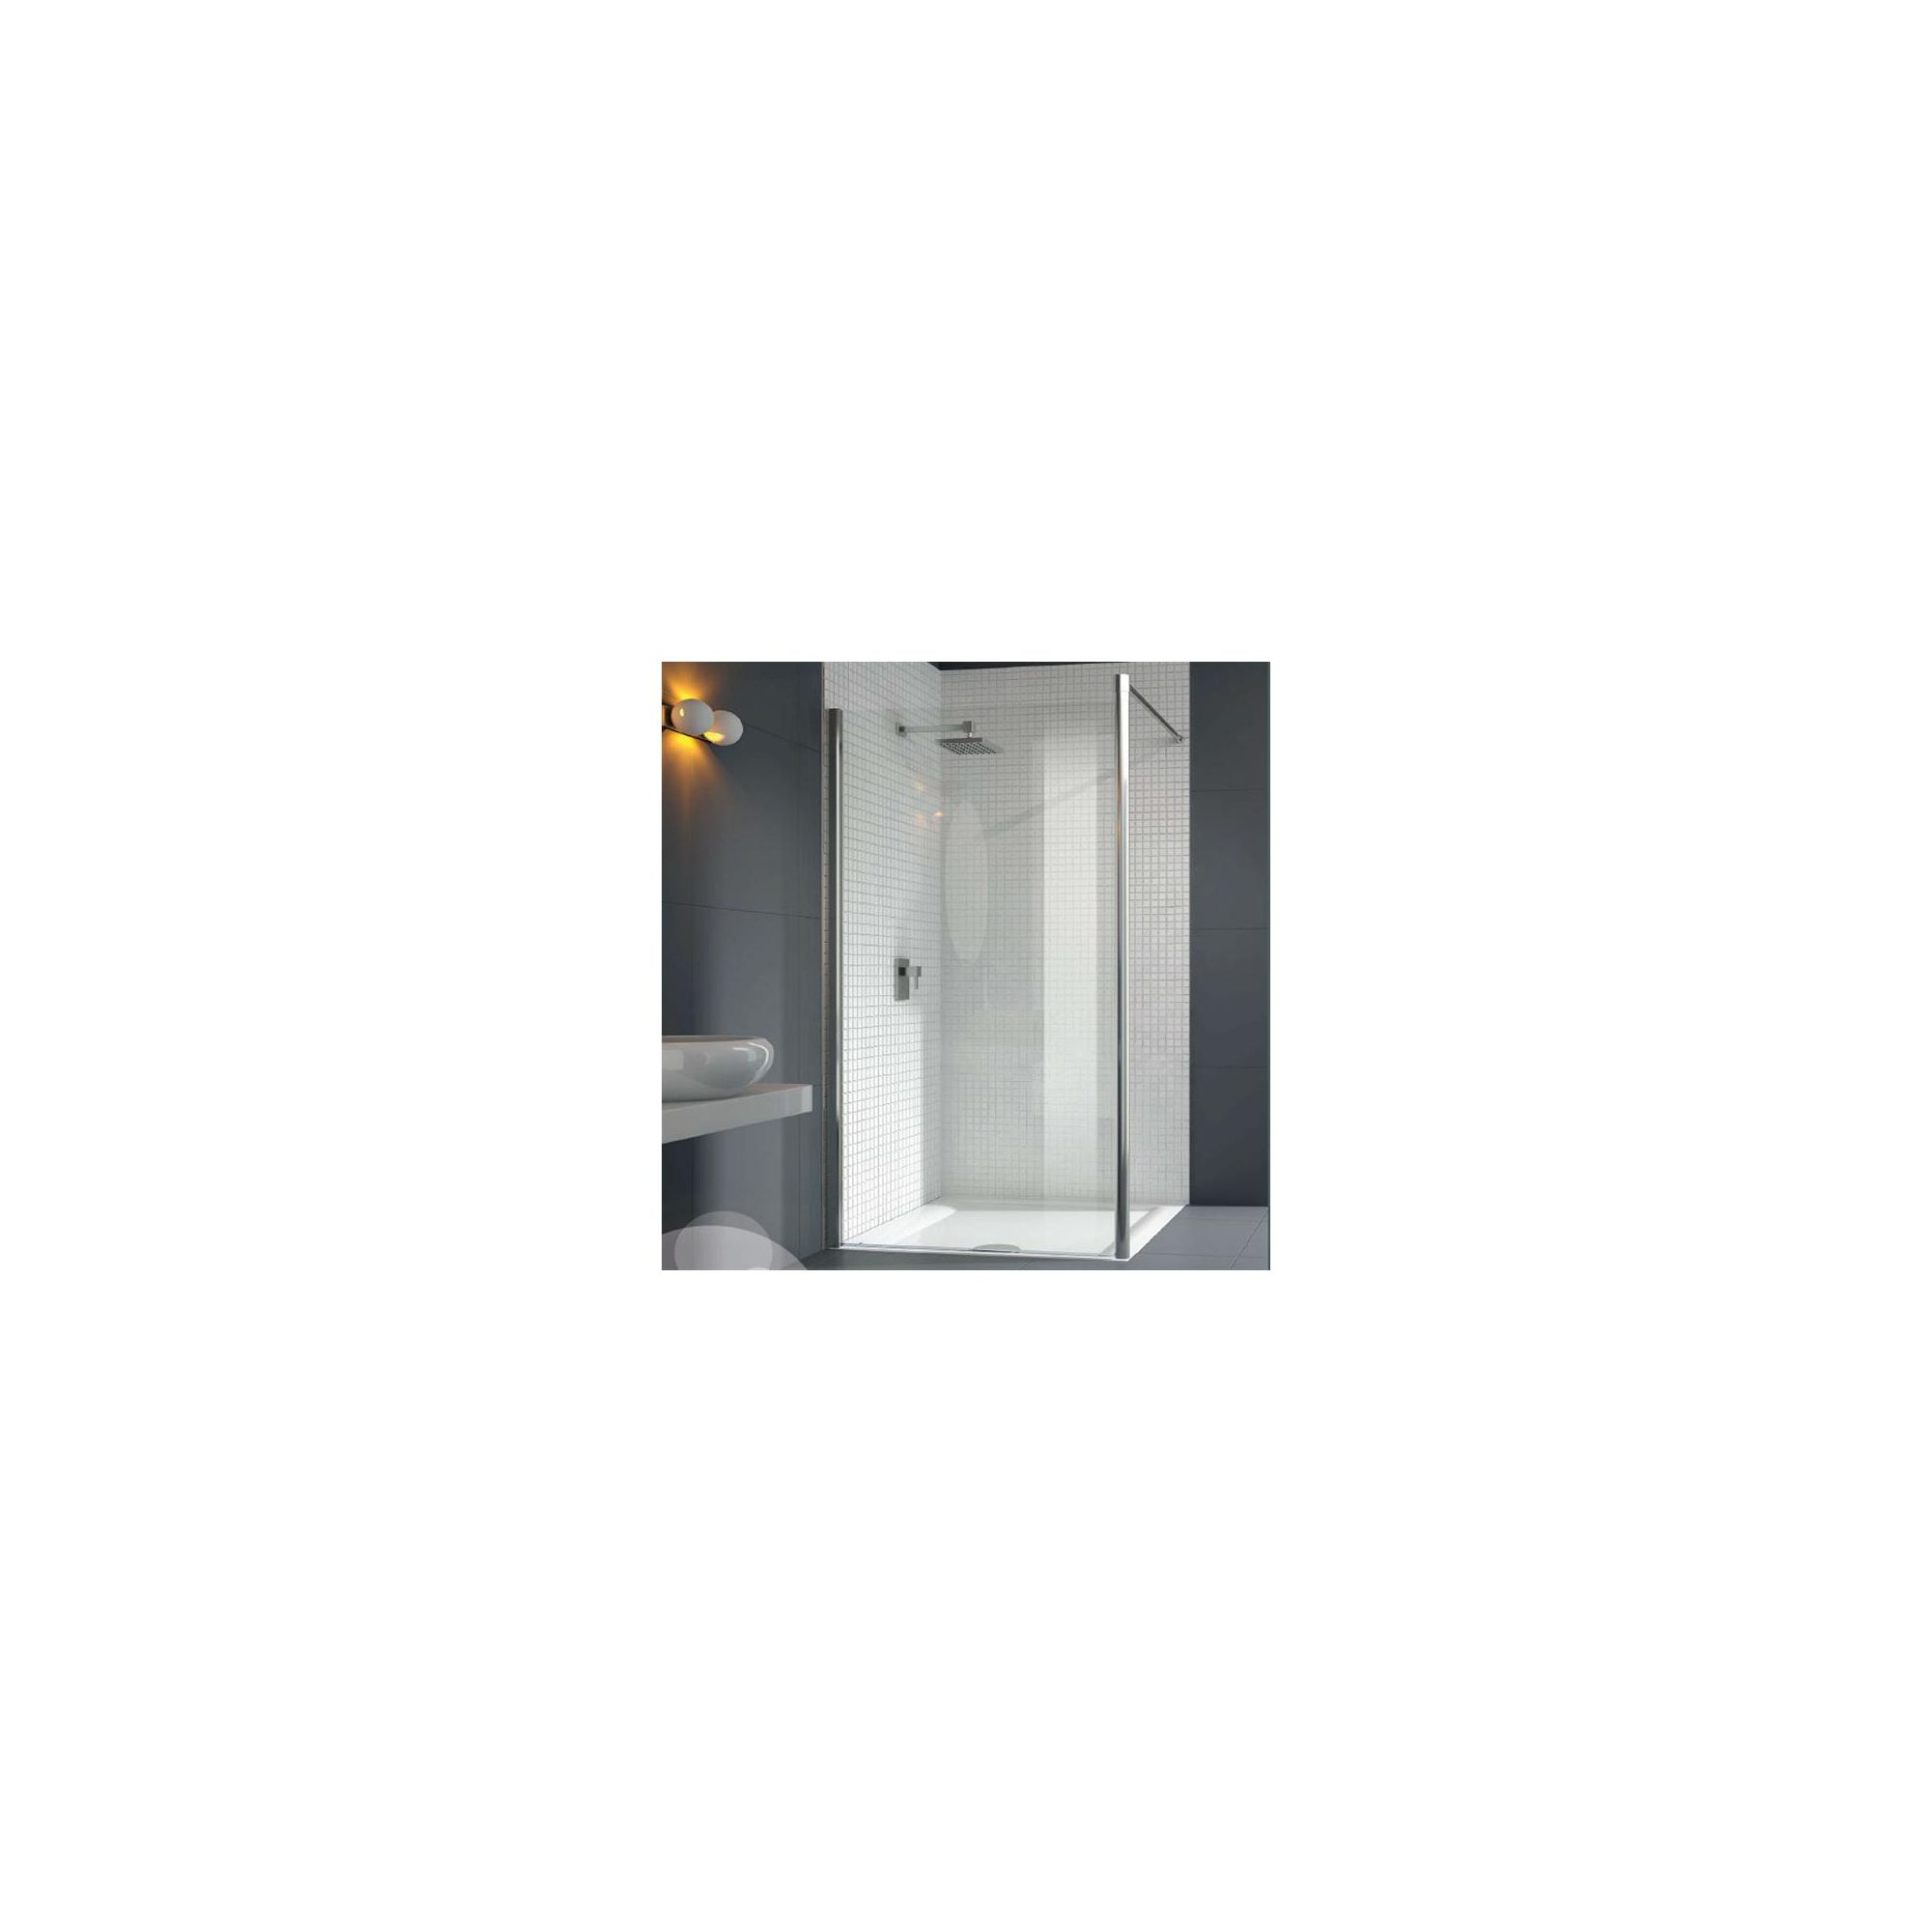 Merlyn Vivid Six Wet Room Shower Enclosure, 1000mm x 800mm, Horizontal Support Bar, Low Profile Tray, 6mm Glass at Tescos Direct